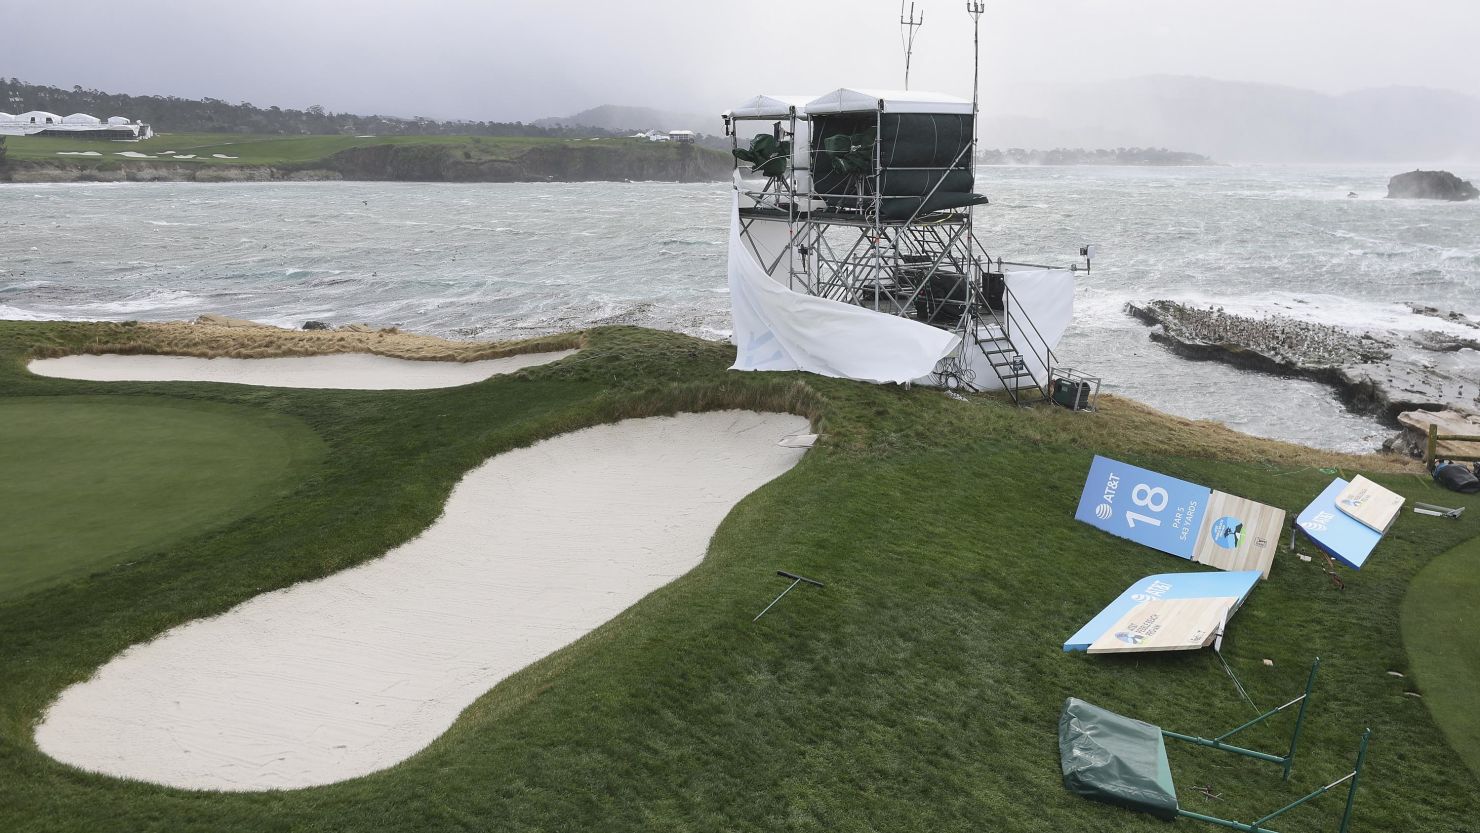 High winds blow against television towers and course signage ahead of the delayed final round start the AT&T Pebble Beach Pro-Am at Pebble Beach Golf Links in California. Sunday's final round was cancelled due to inclement weather.